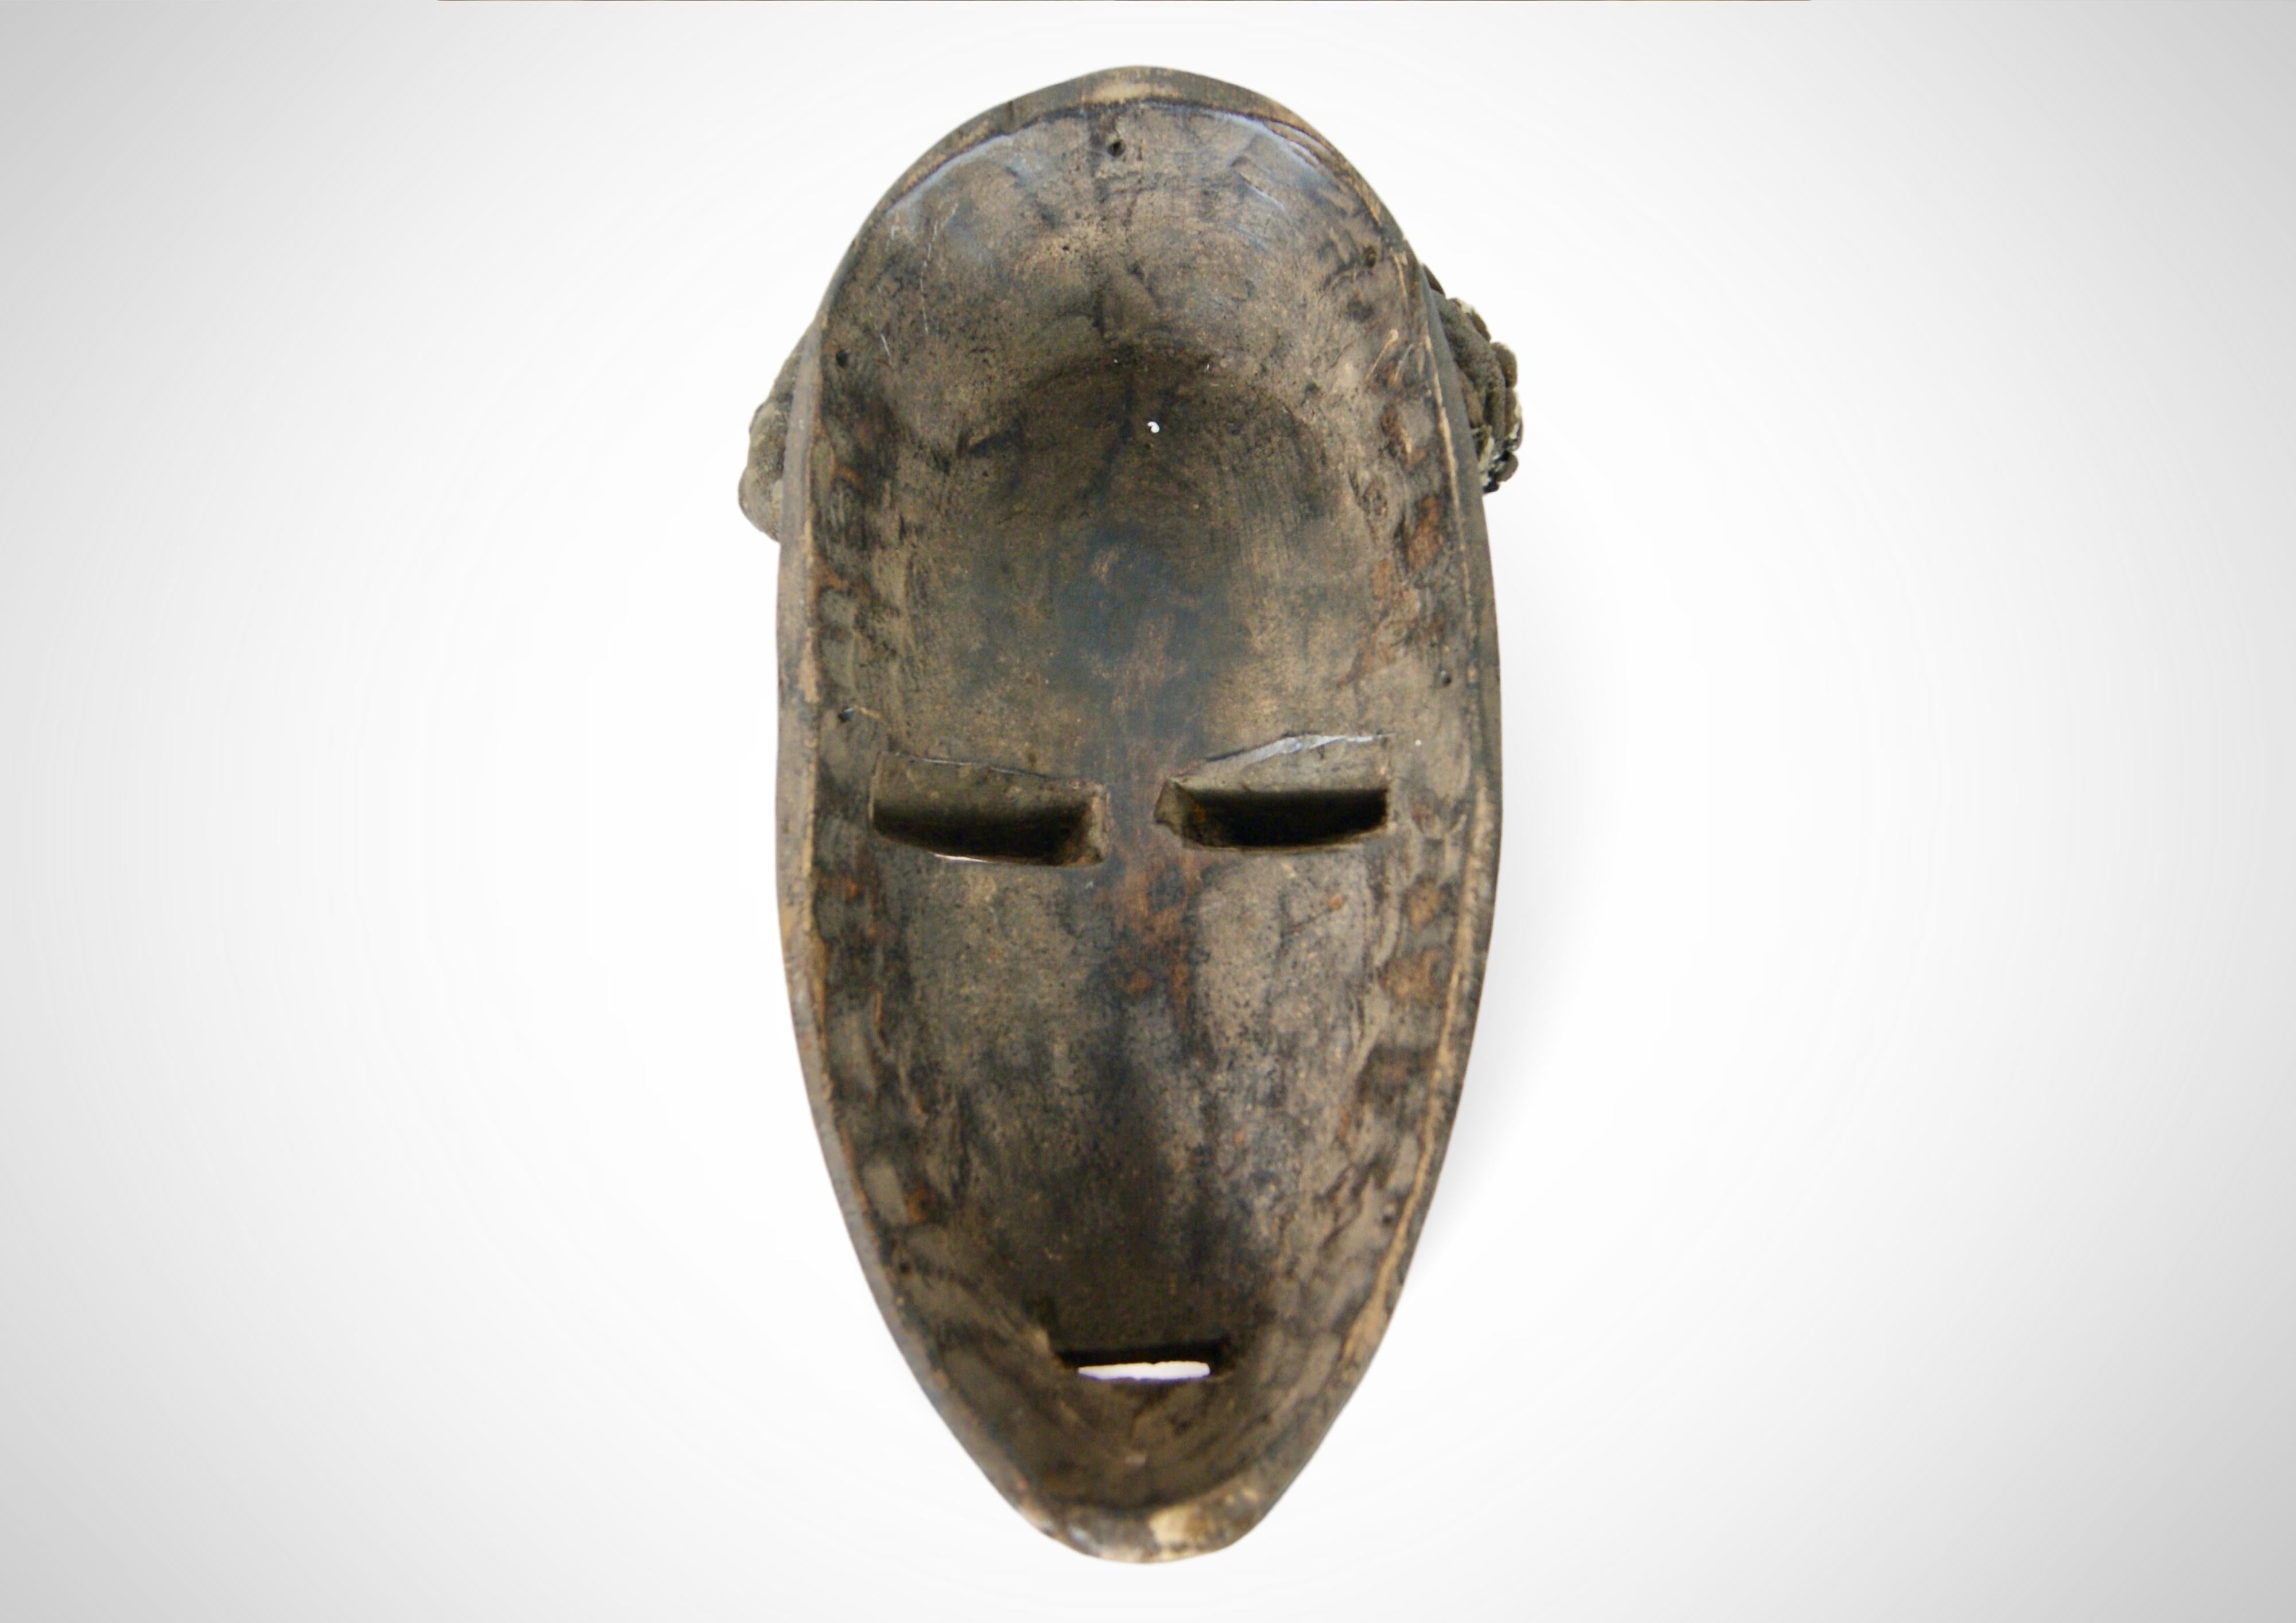 Ancestral Dan Mask 'Deangle' with Cowrie Shells Large For Sale 7